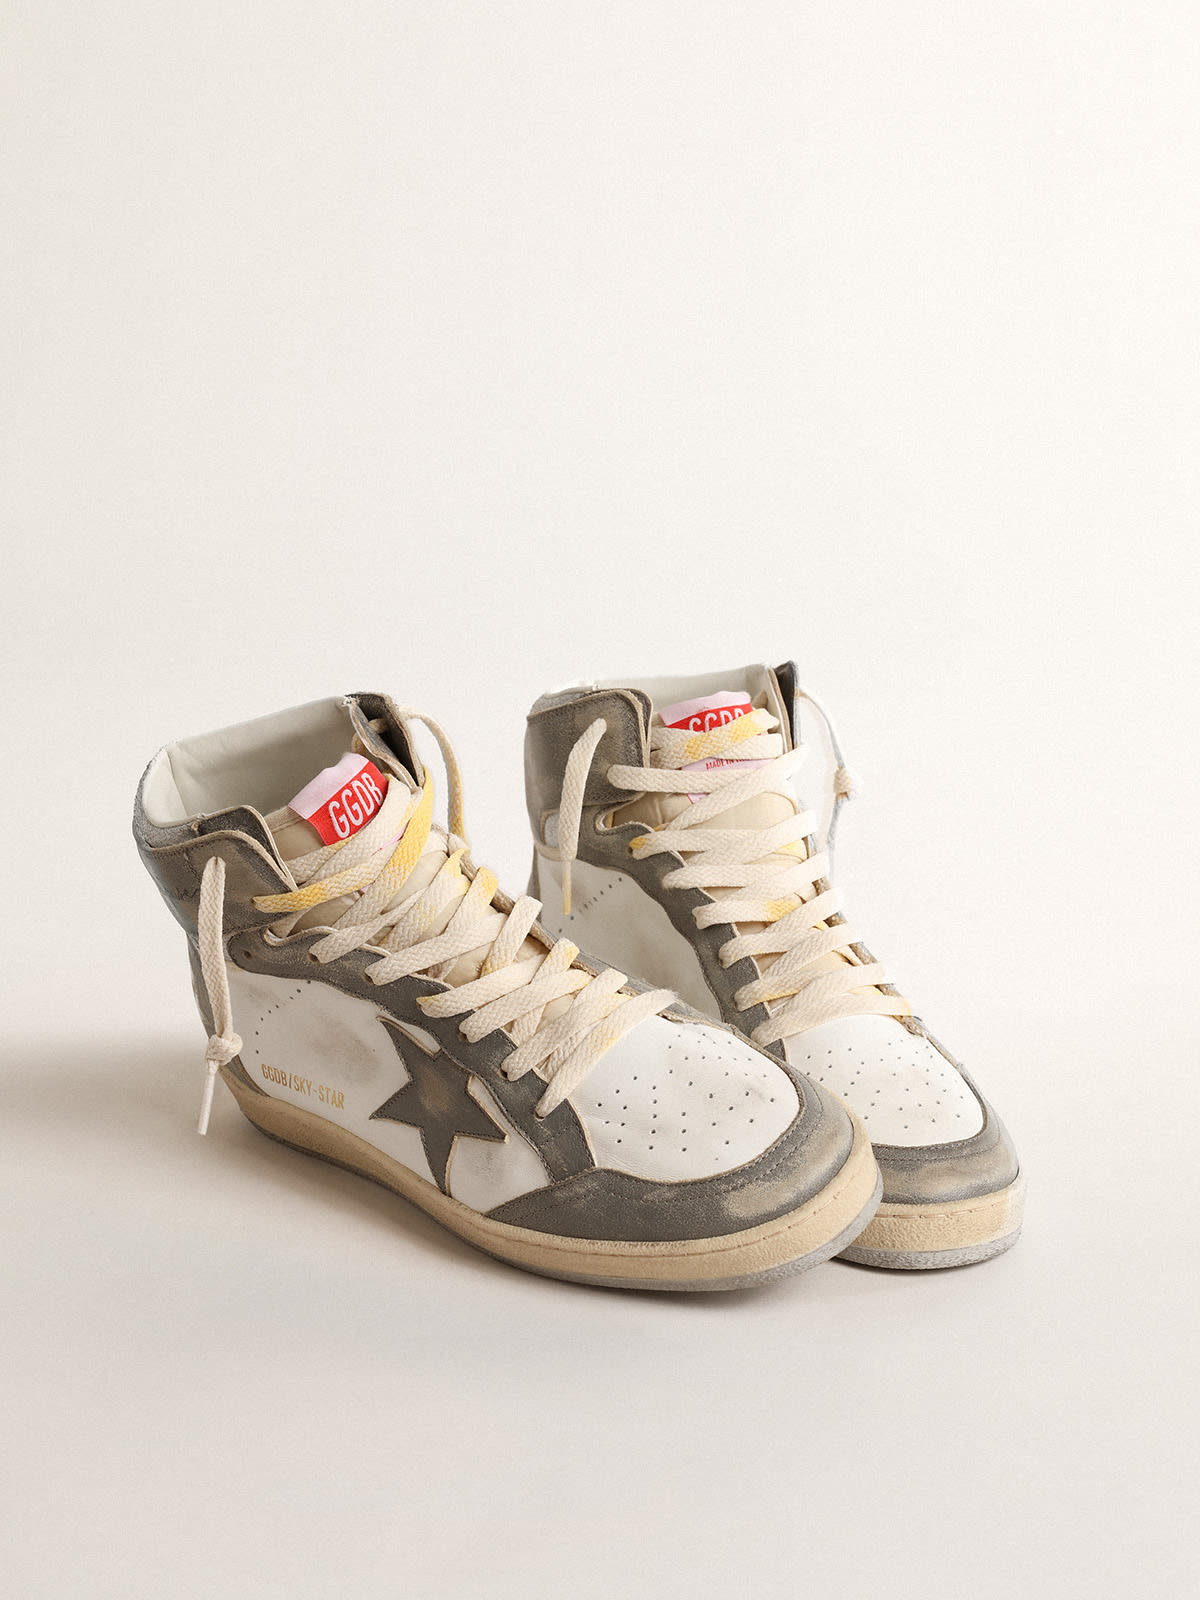 Golden Goose - Sky-Star in white nappa leather with faded gray leather inserts in 